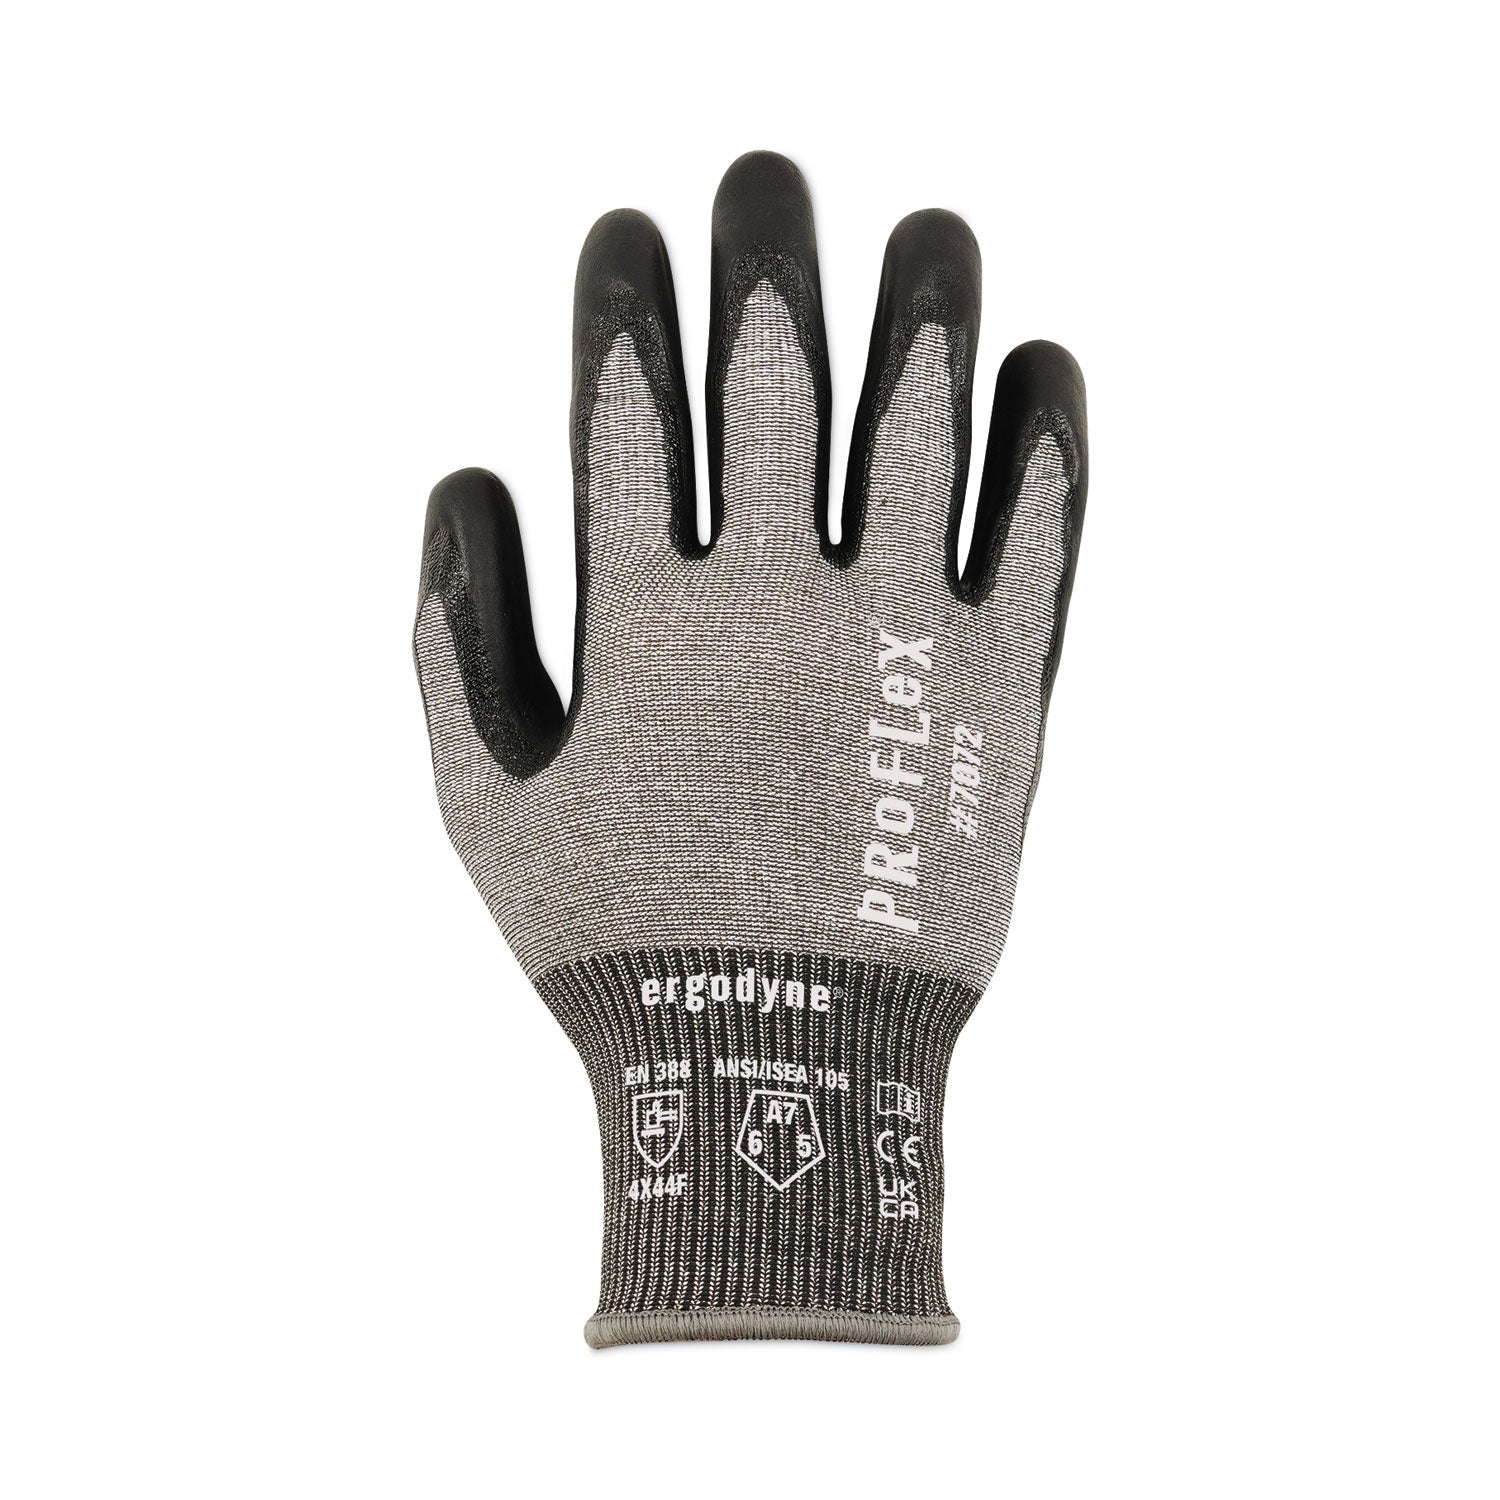 proflex-7072-ansi-a7-nitrile-coated-cr-gloves-gray-small-pair-ships-in-1-3-business-days_ego10312 - 3